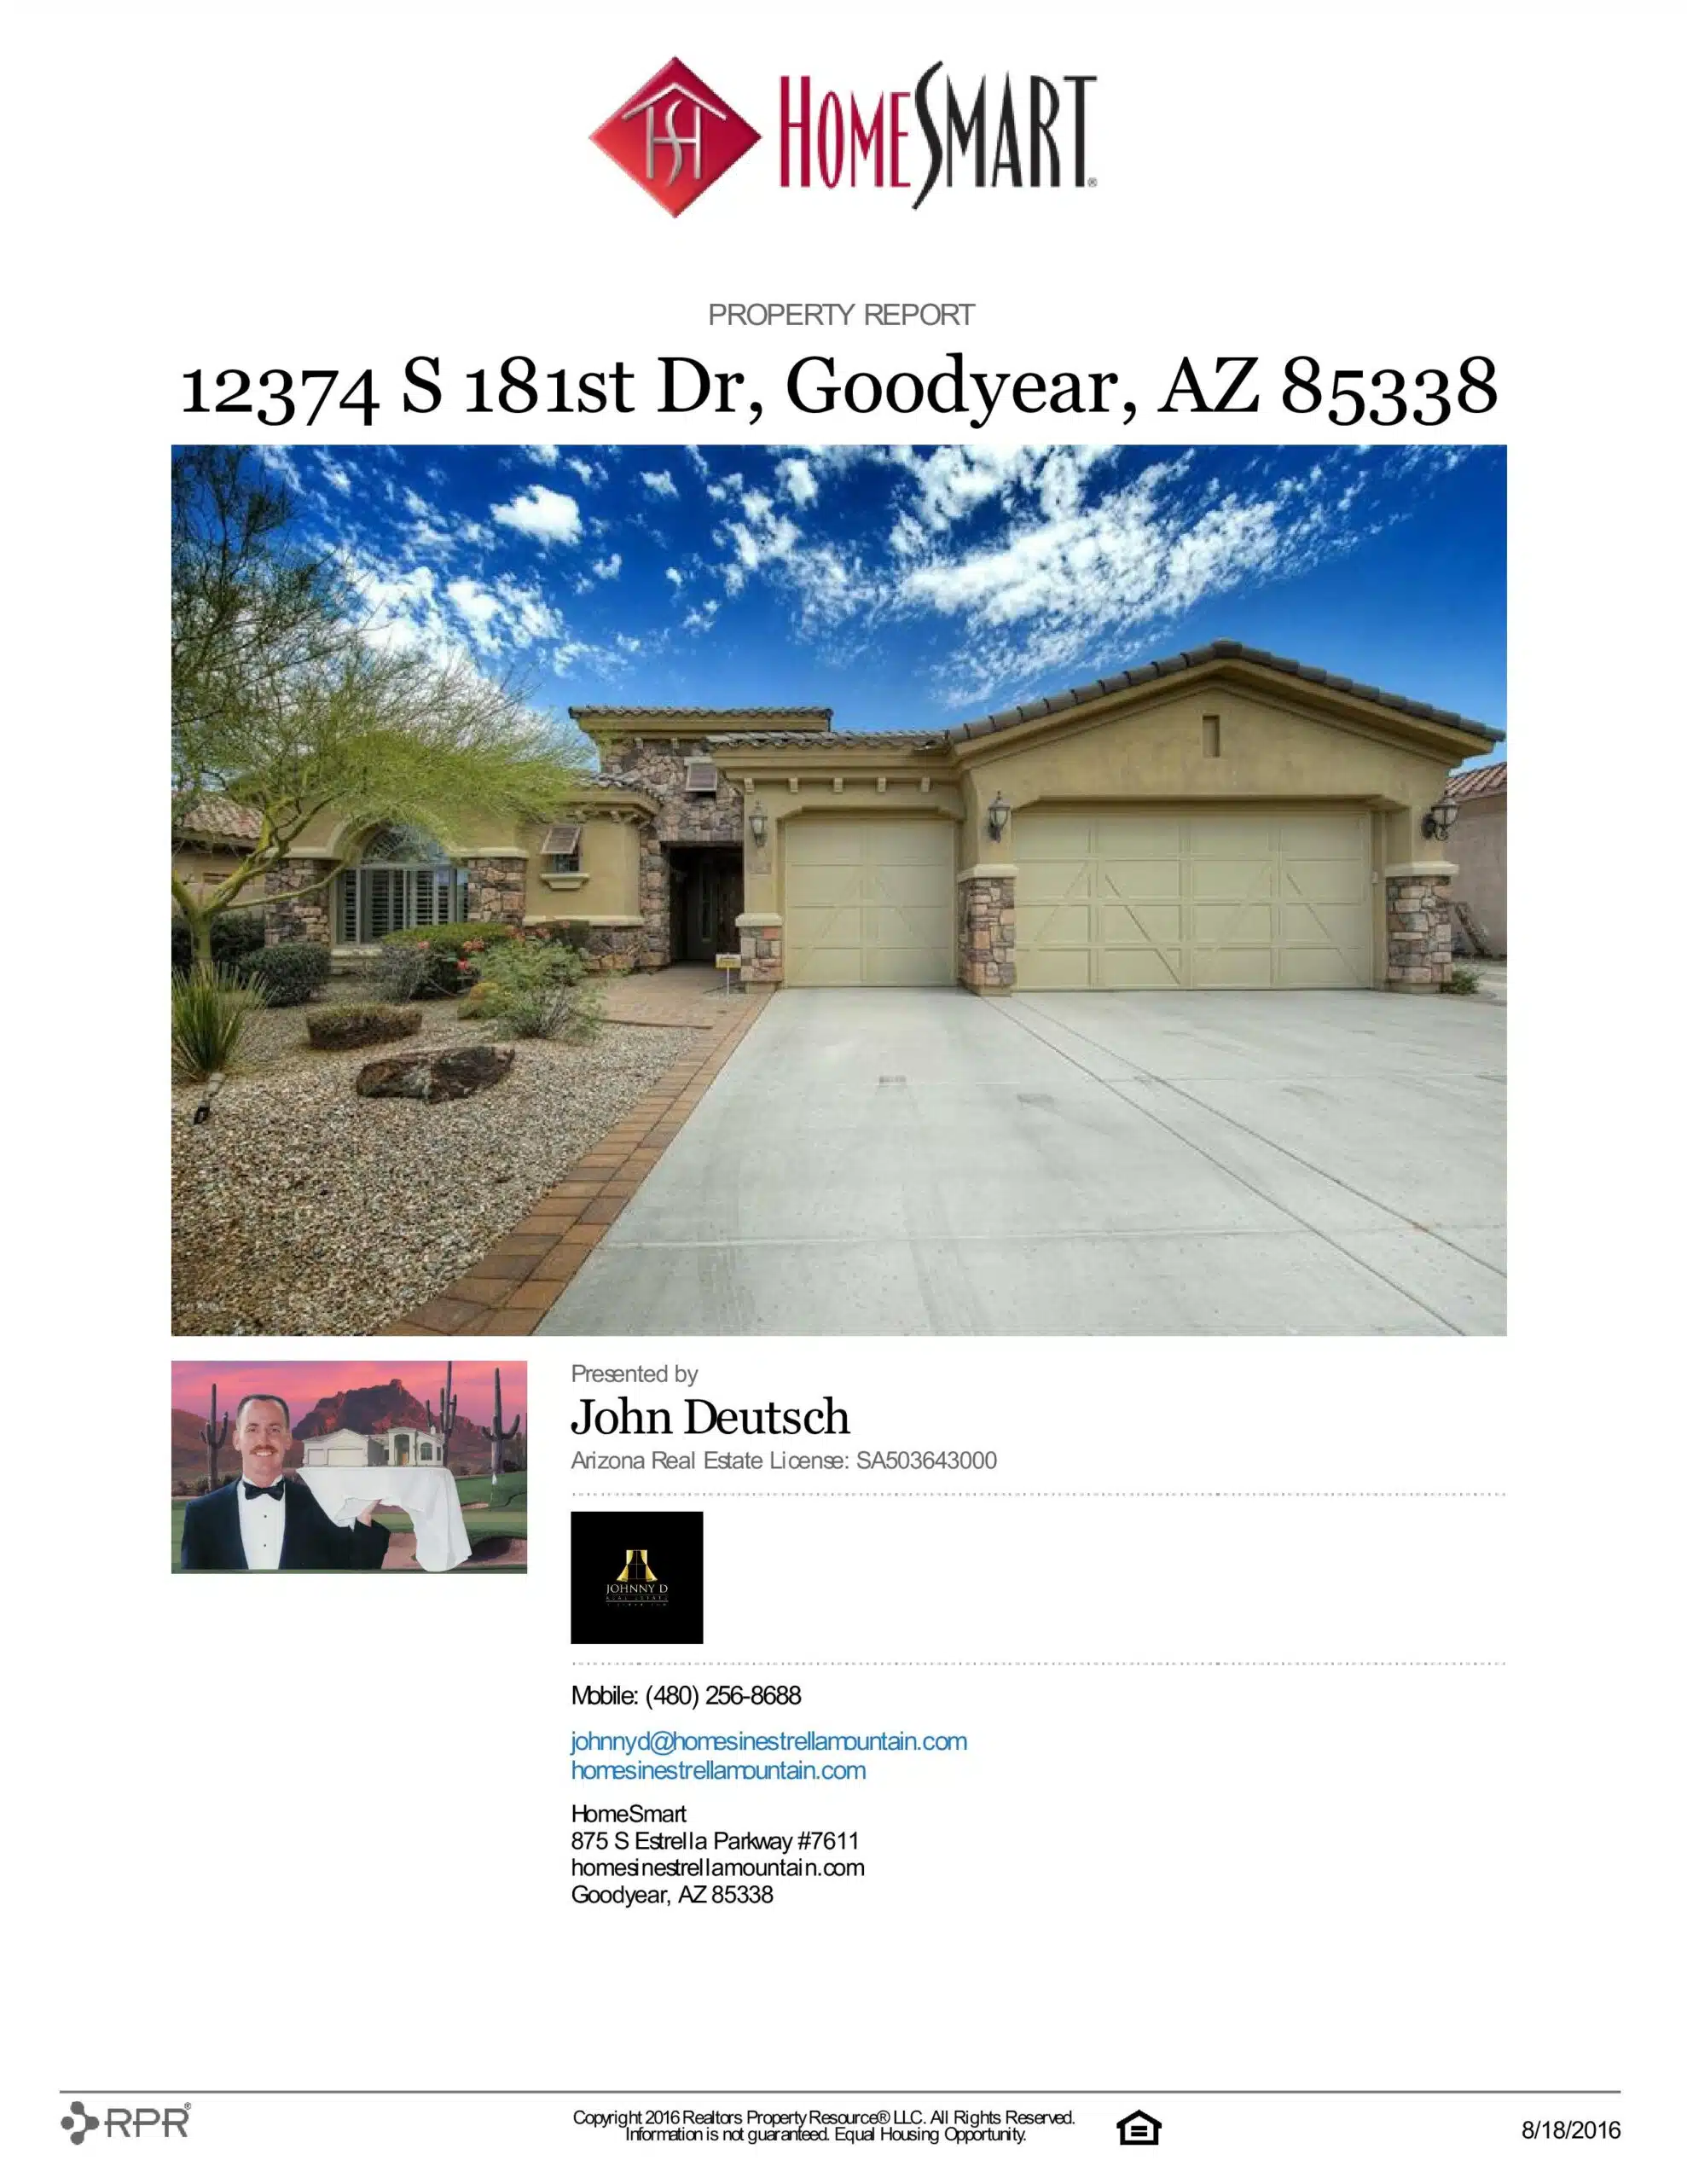 Property-Report_12374-S-181st-Dr-Goodyear-AZ-85338_2016-08-18-10-08-18-page-001